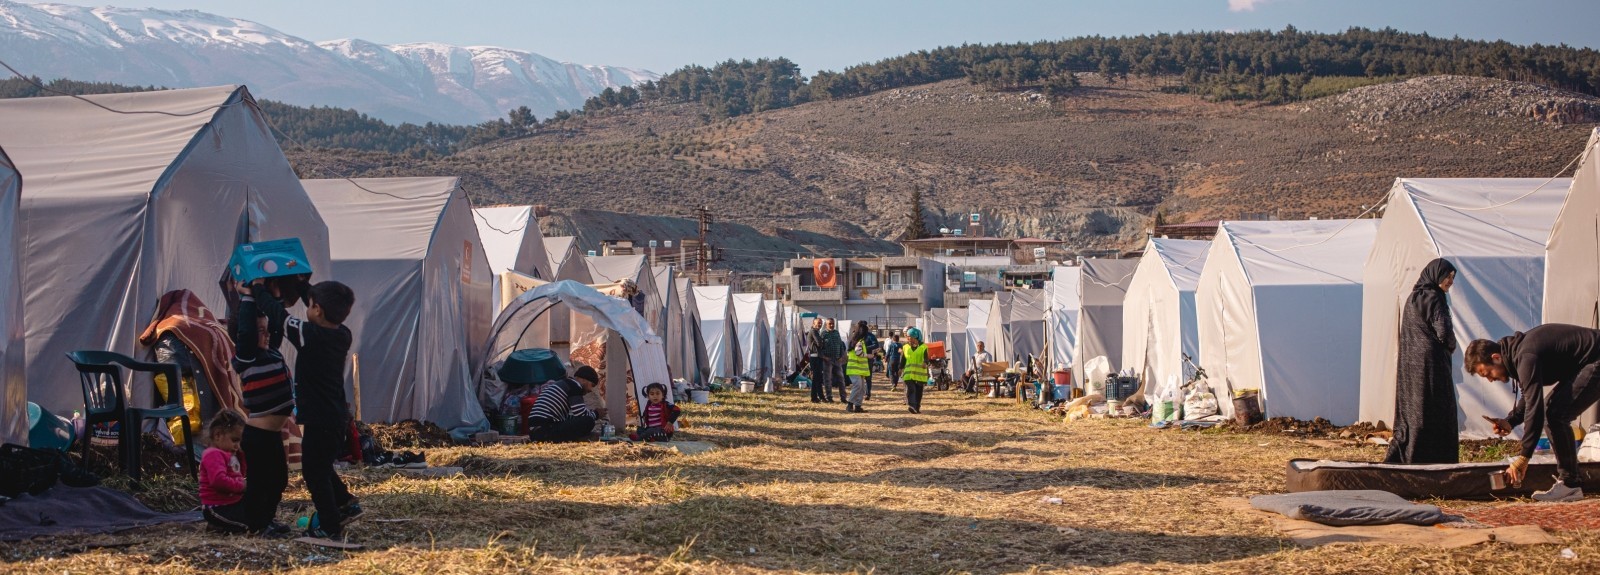 Shaken to the core: The plight of Syrian refugees after February’s earthquake